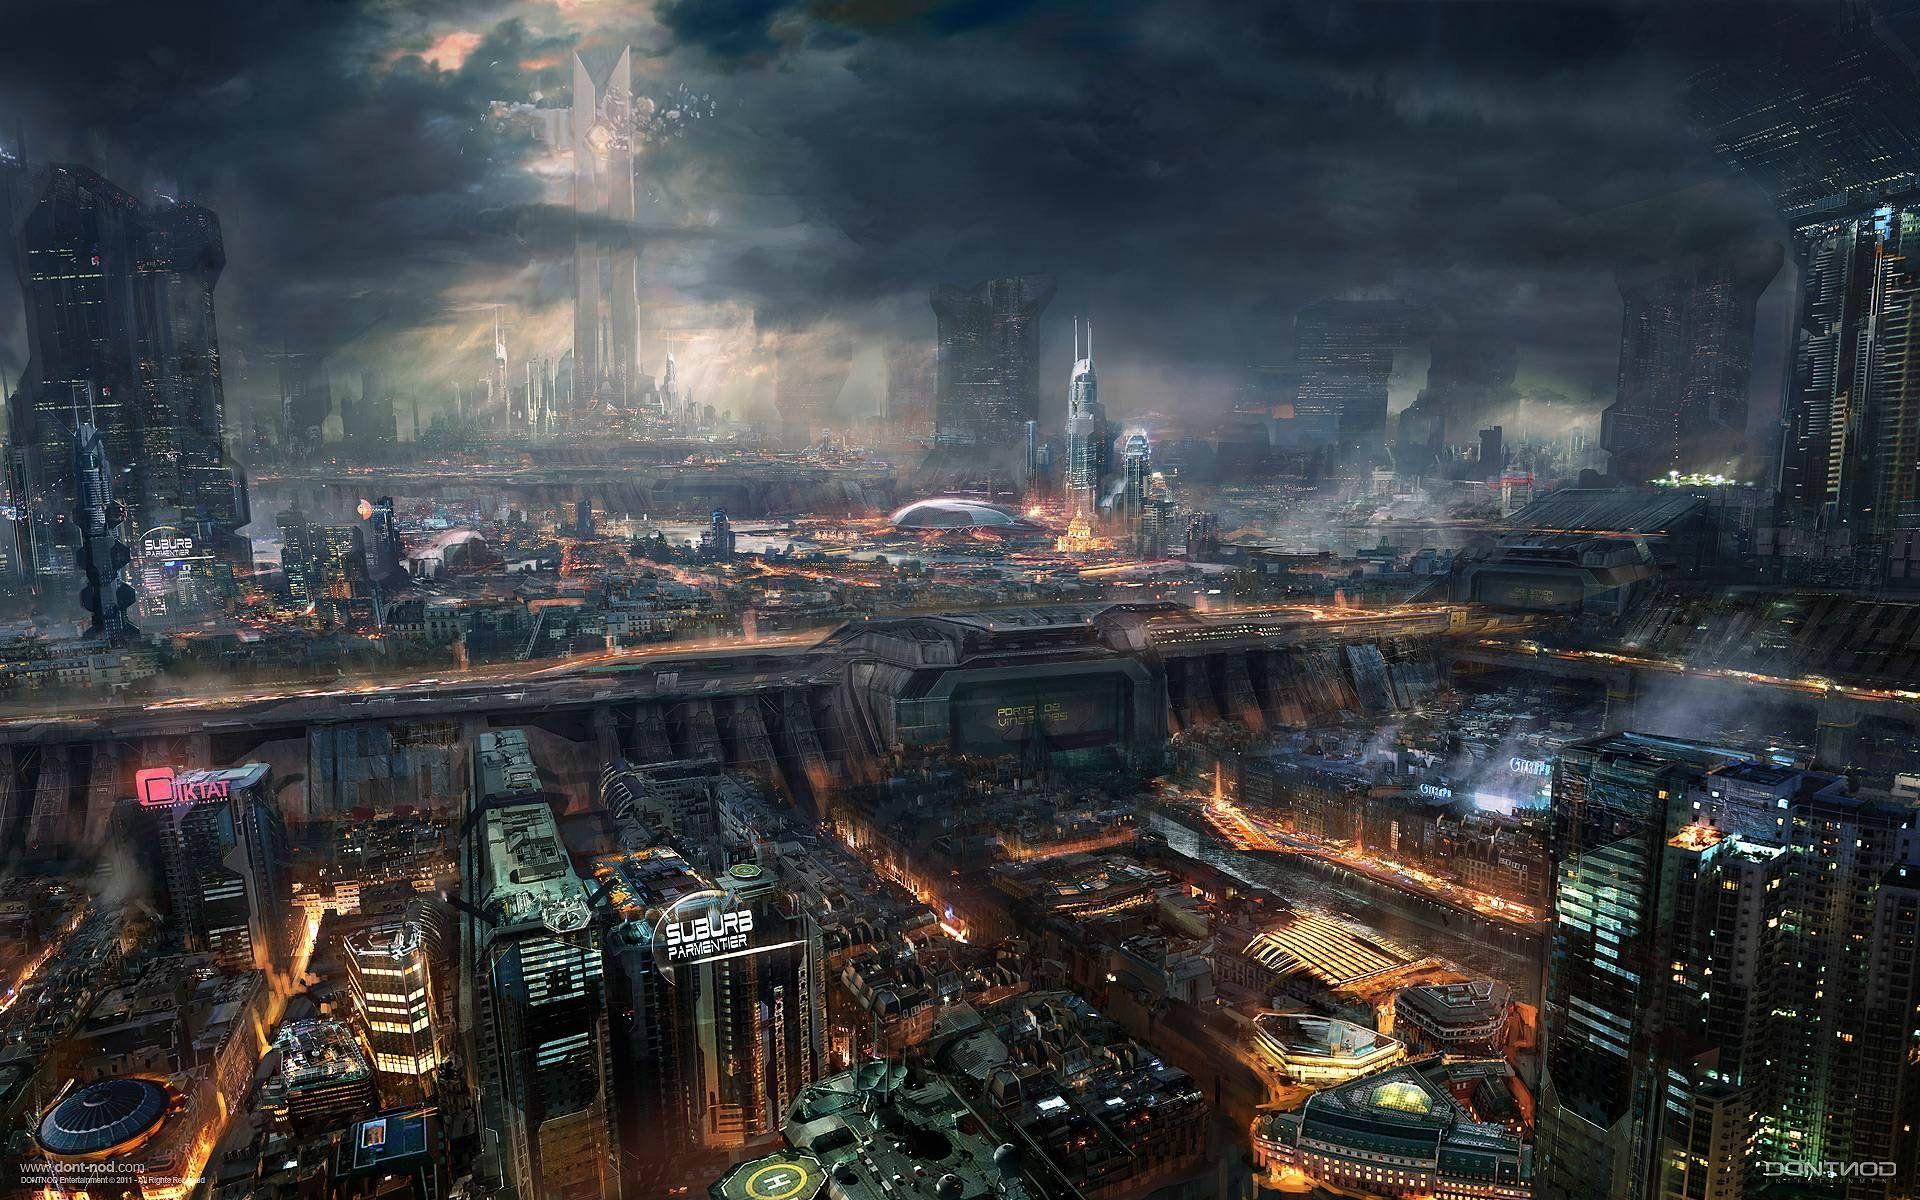 Cyberpunk City Background Images, HD Pictures and Wallpaper For Free  Download